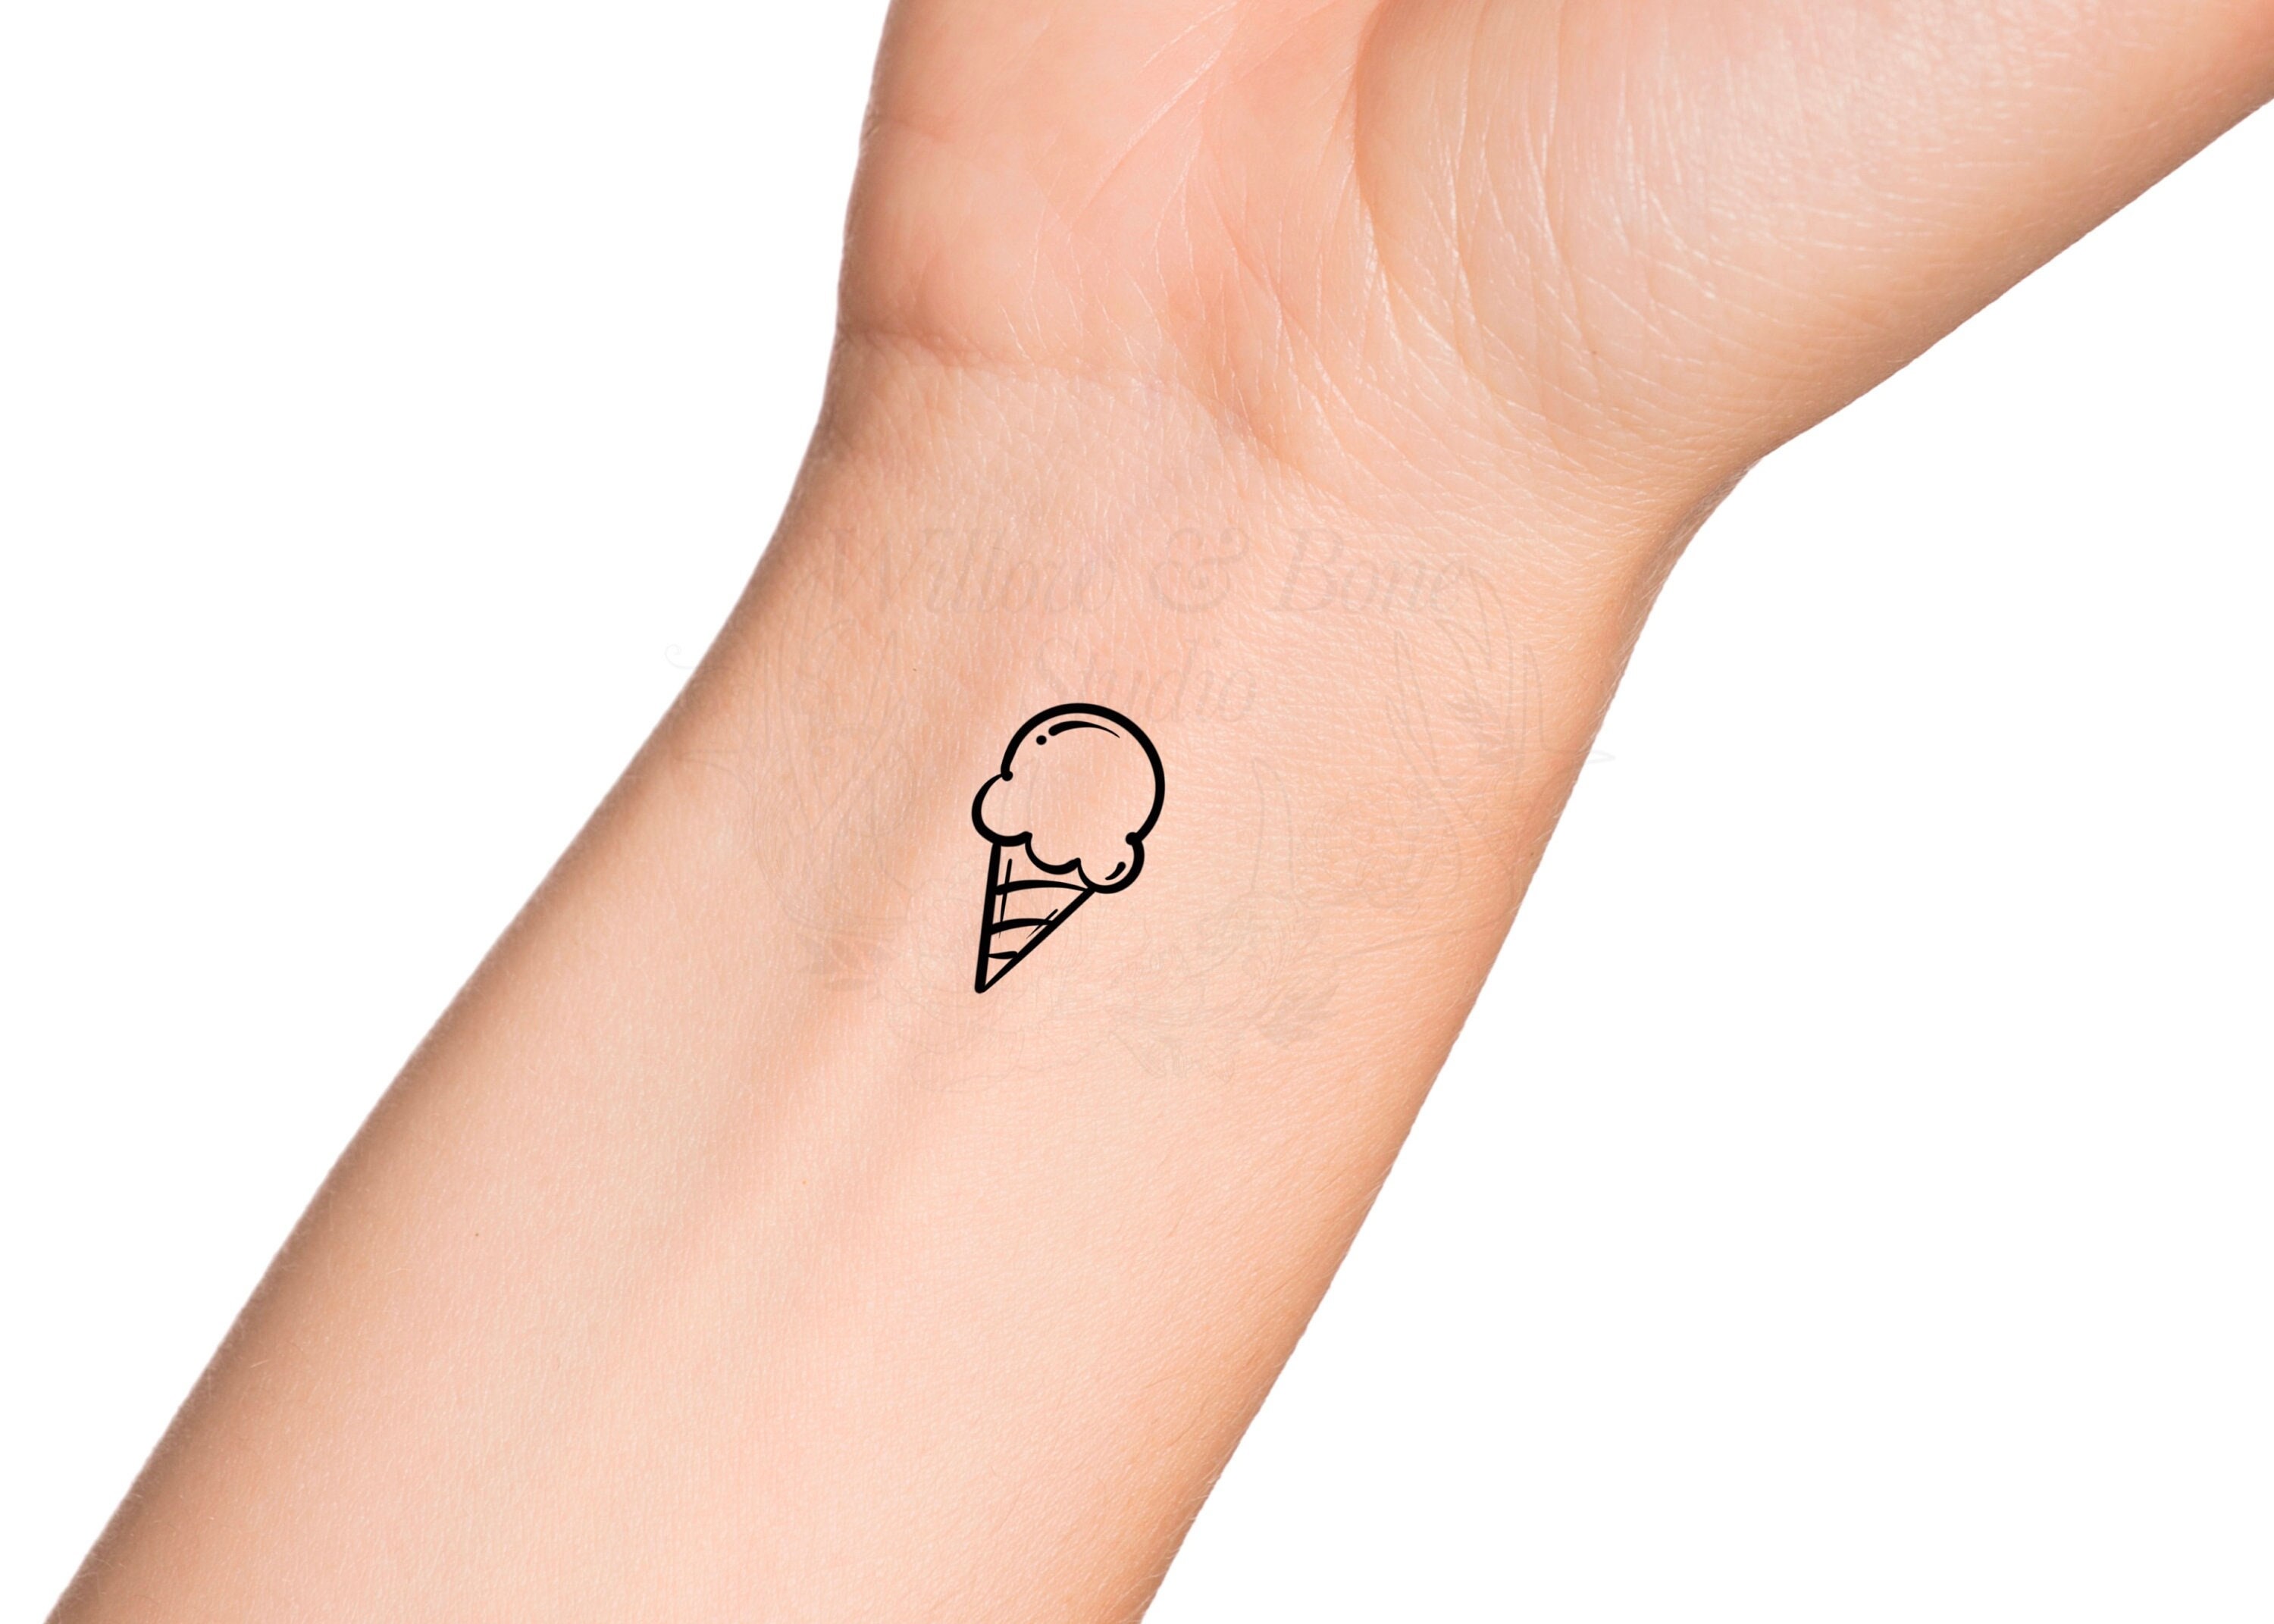 Melted Ice Cream Cone Tattoo On Forearm